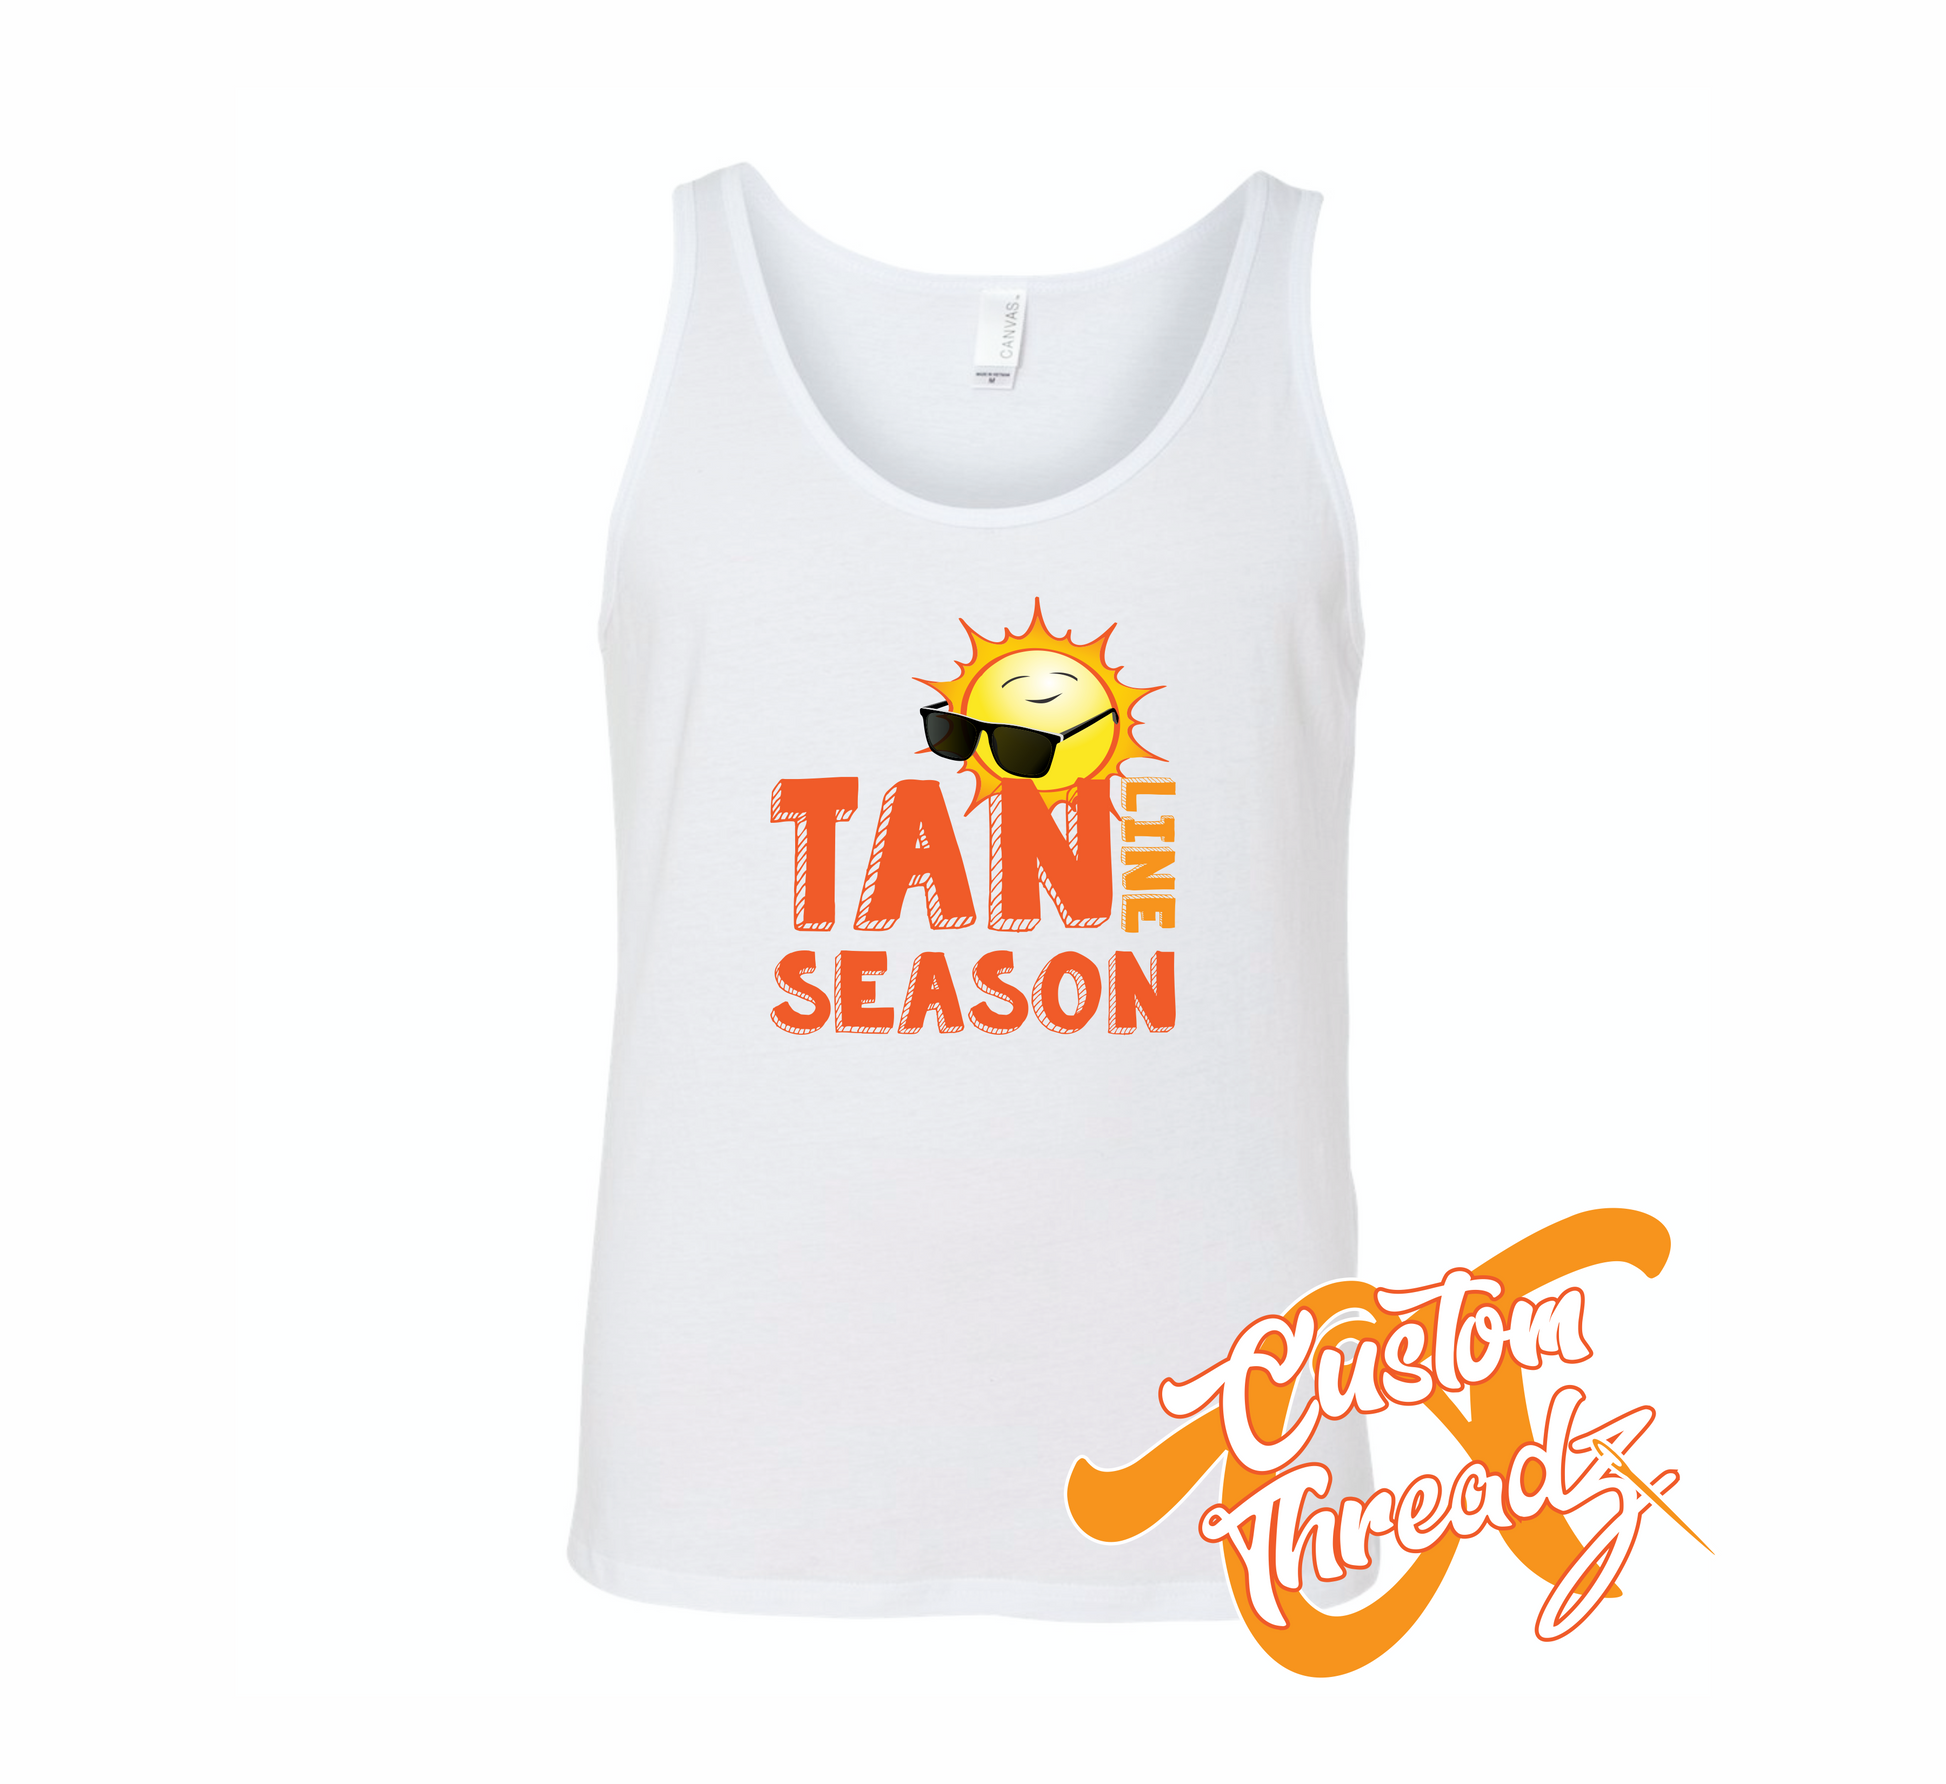 white tank top with sun with sunglasses tan line season DTG printed design